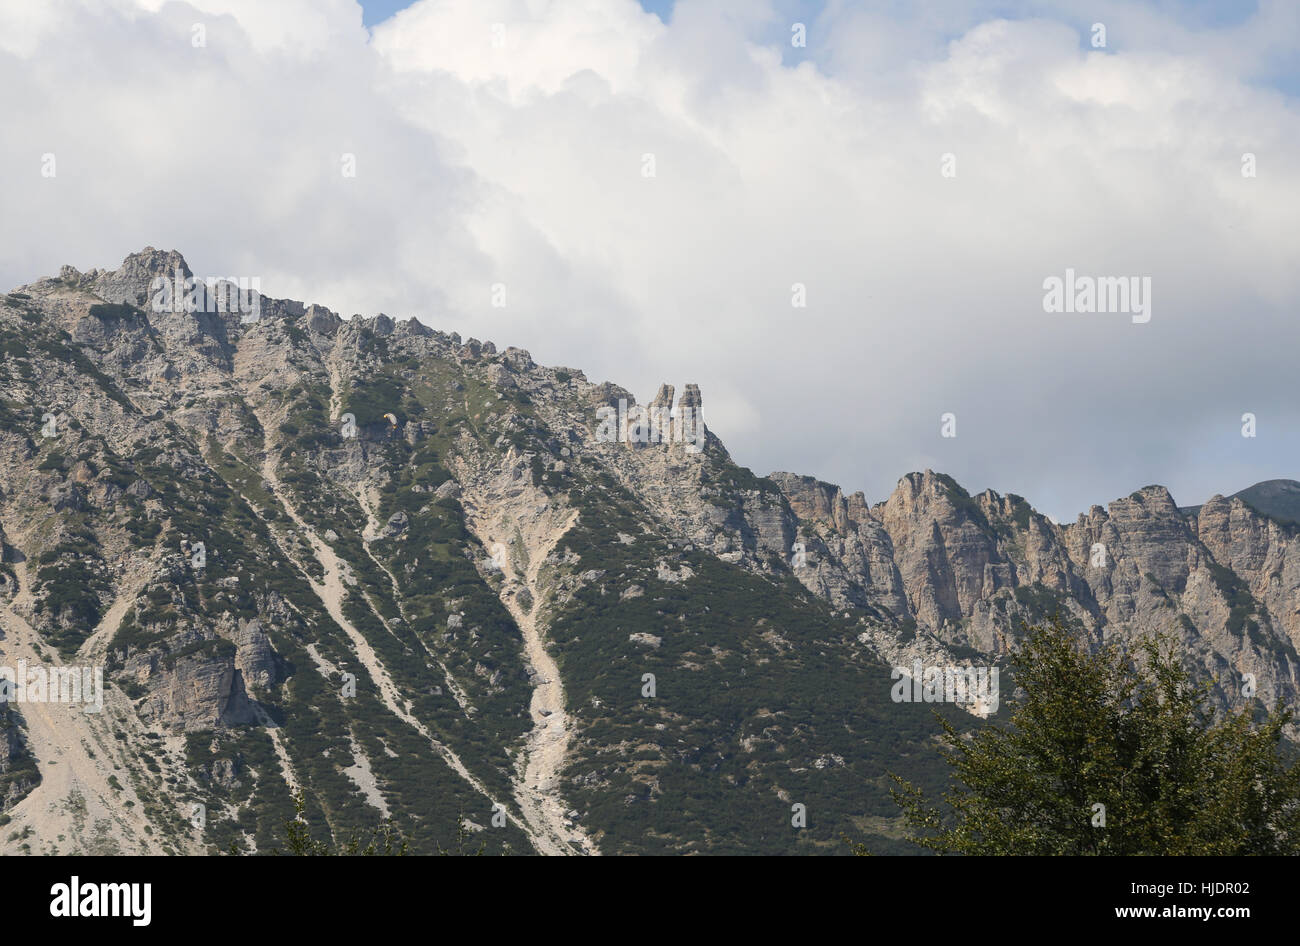 great landscape of italian mountains called Venetian Prealps in the province of Vicenza Stock Photo